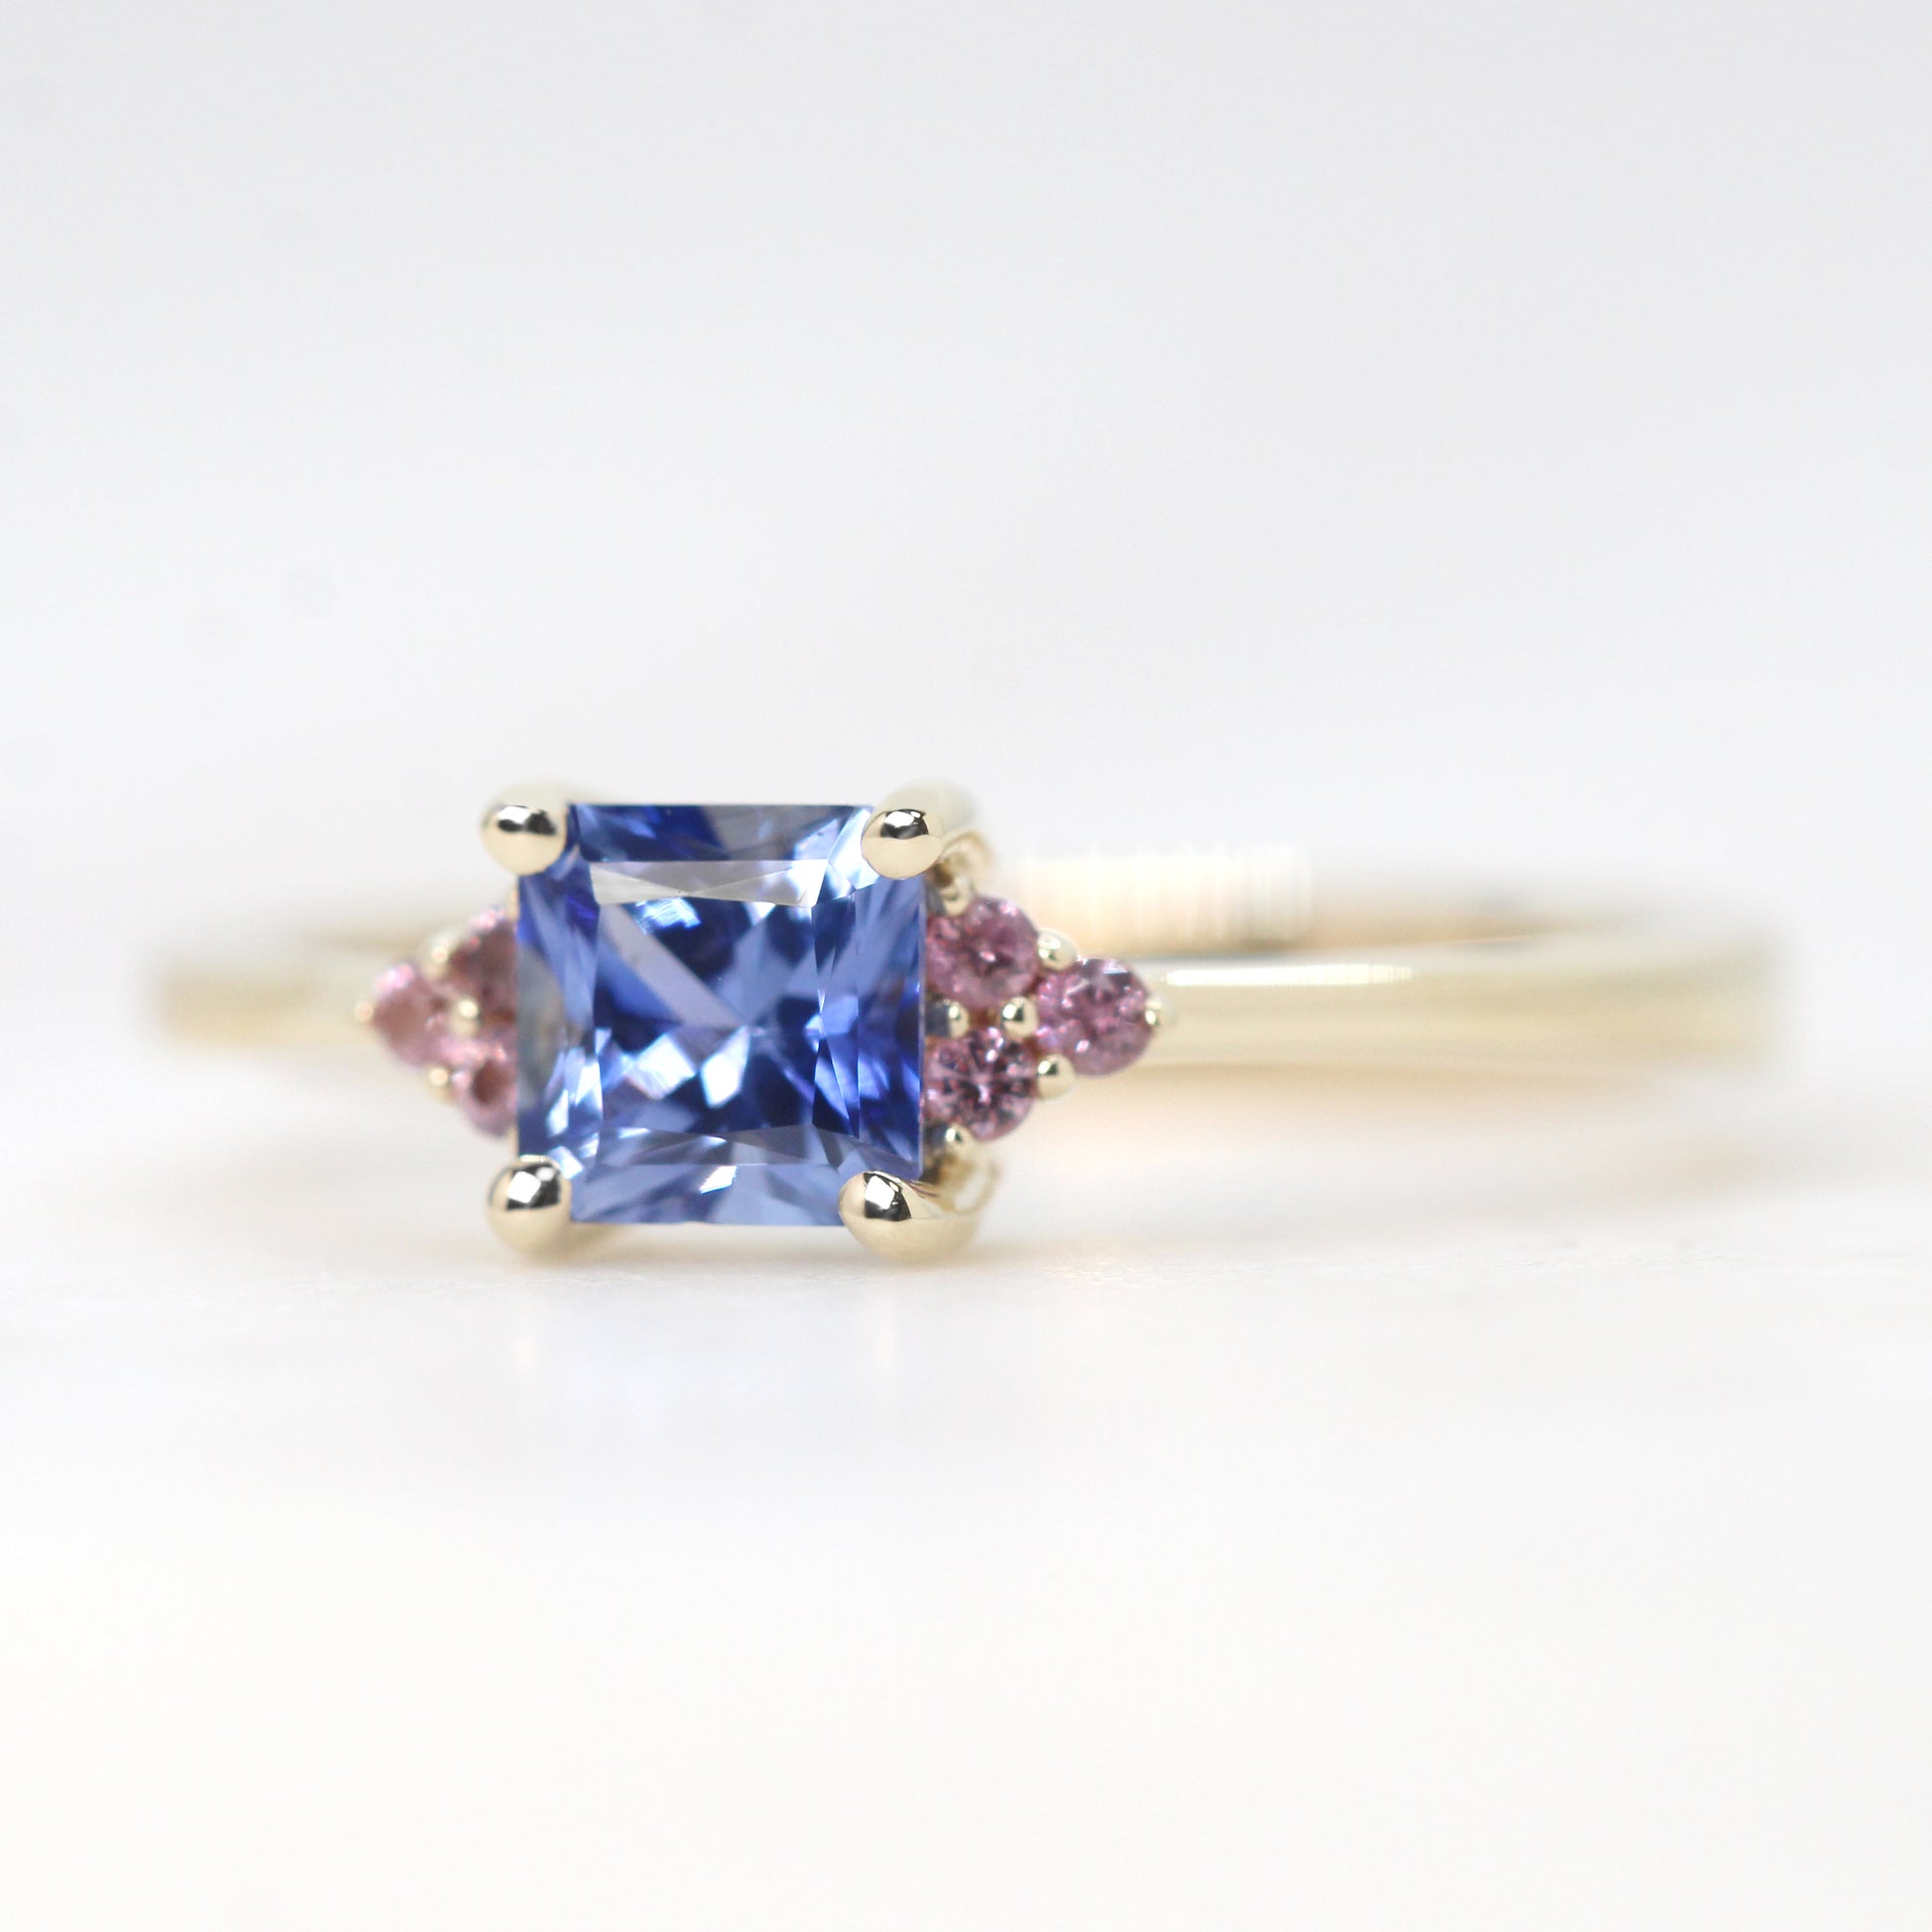 Imogene Ring with a 0.78 Carat Cornflower Blue Radiant Cut Sapphire and Berry Sapphire Accents in 14k Yellow Gold - Ready to Size and Ship - Midwinter Co. Alternative Bridal Rings and Modern Fine Jewelry